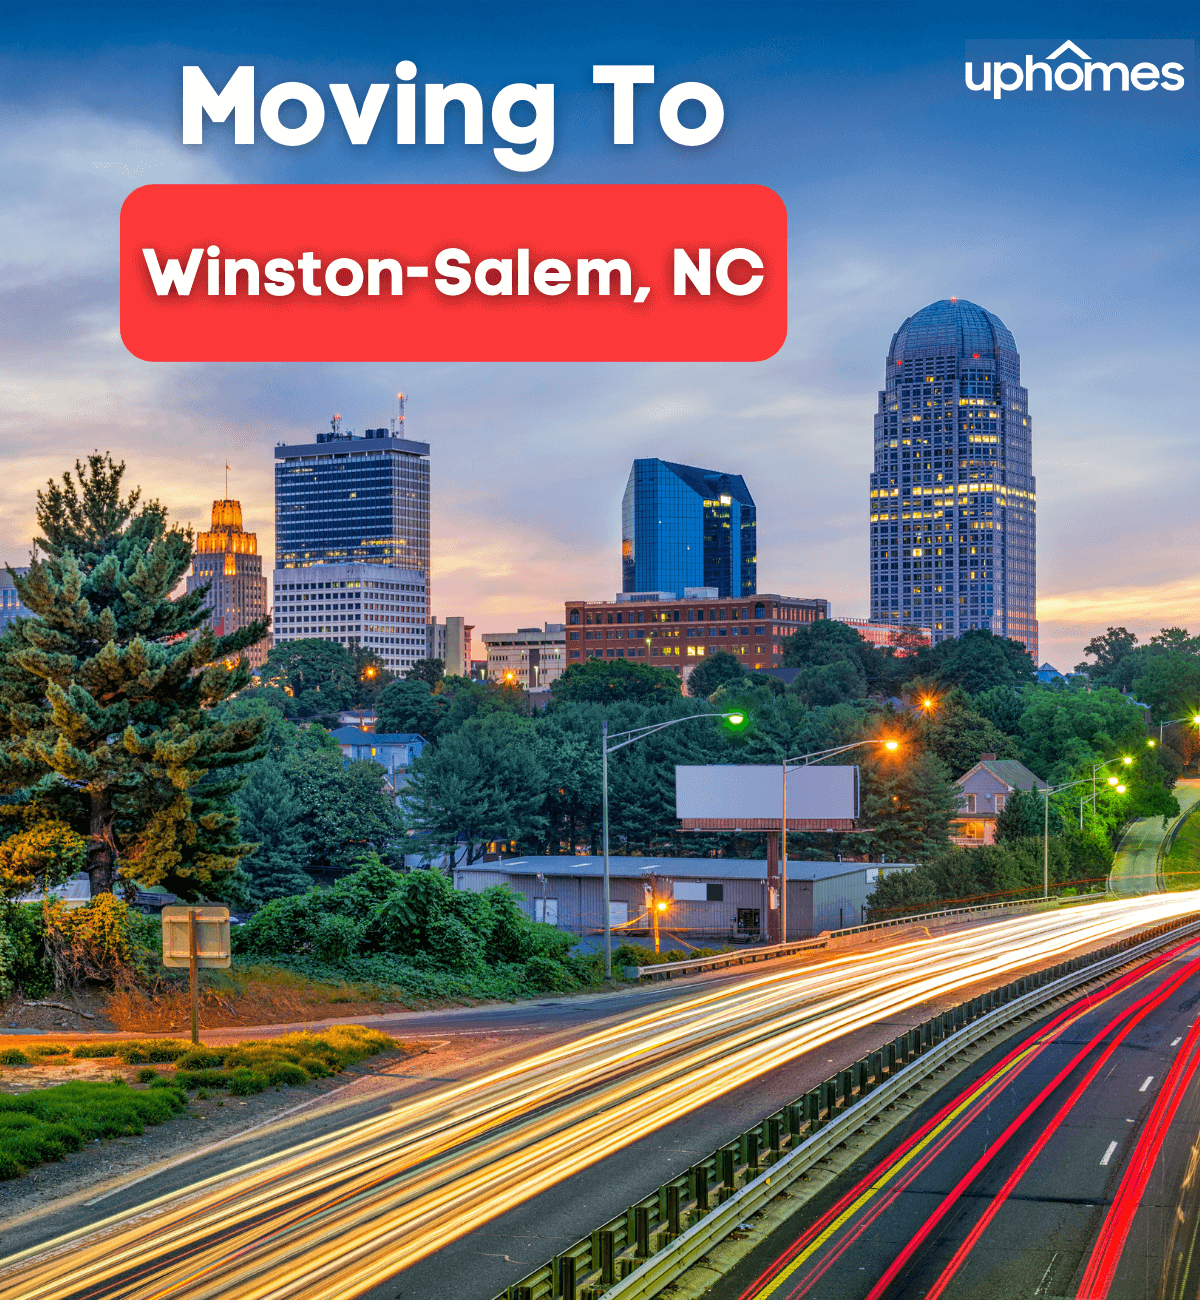 Moving to Winston-Salem, NC - What is it like Living in Winston-Salem?